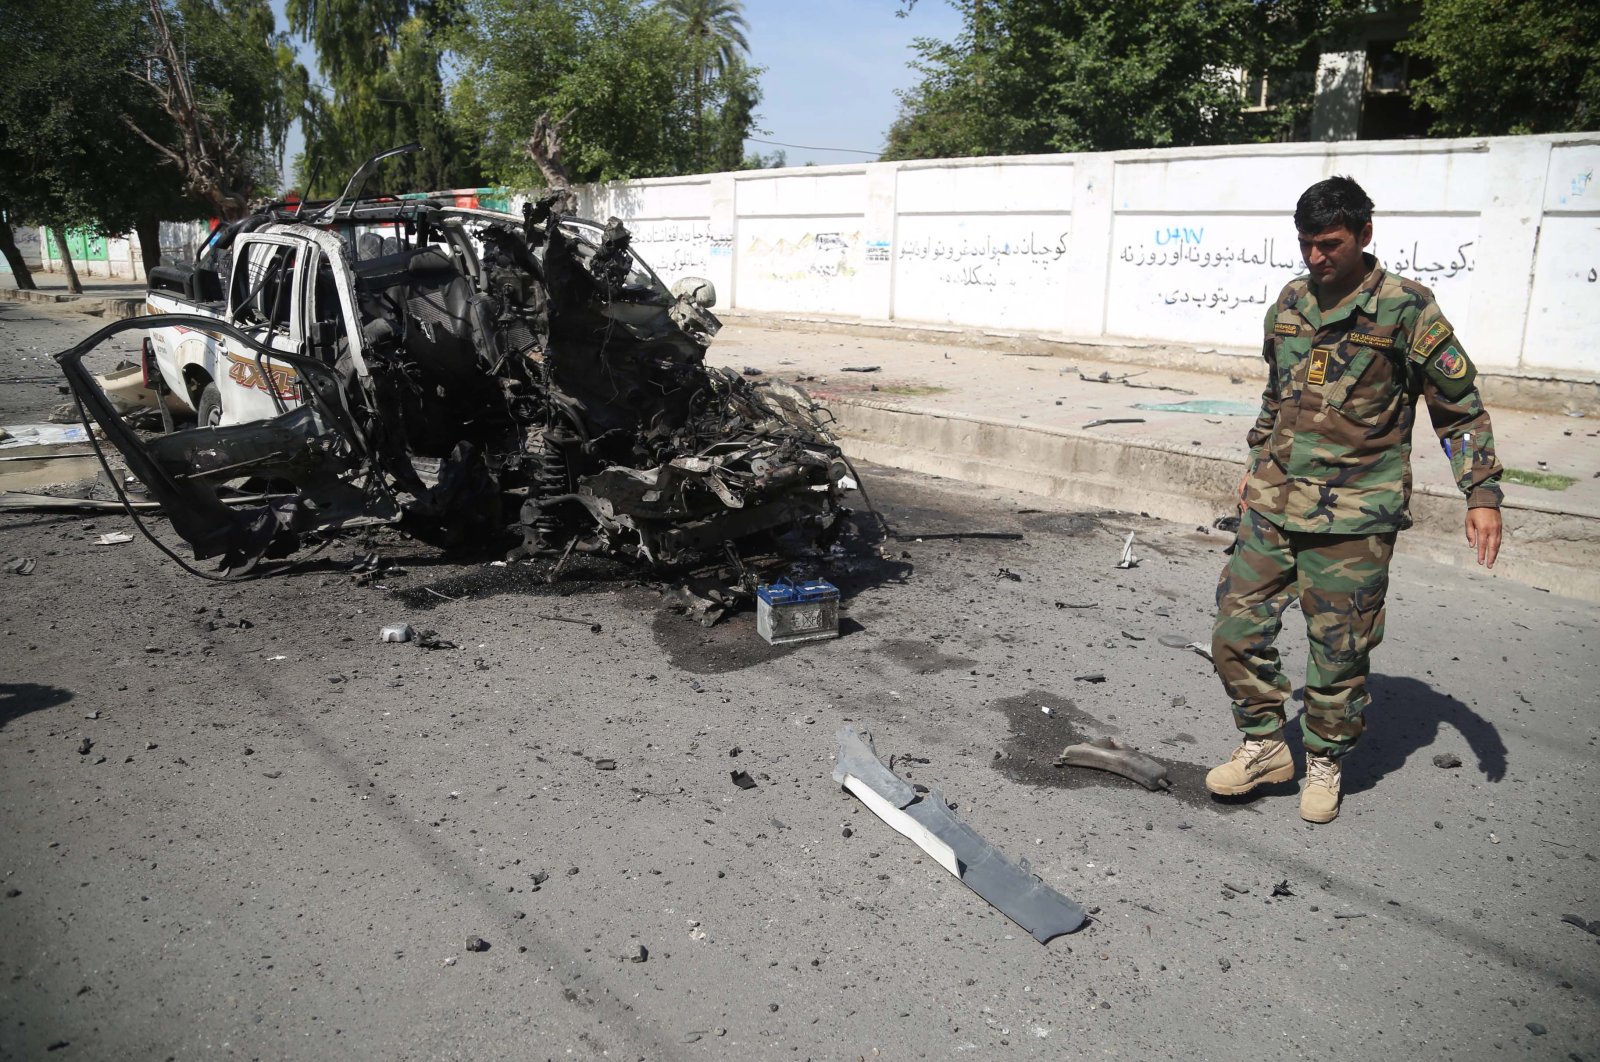 Afghan security officials inspect the scene of a bomb blast that targeted a vehicle of the Afghan National Army, in Jalalabad, Afghanistan, April, 26, 2021. (EPA Photo)